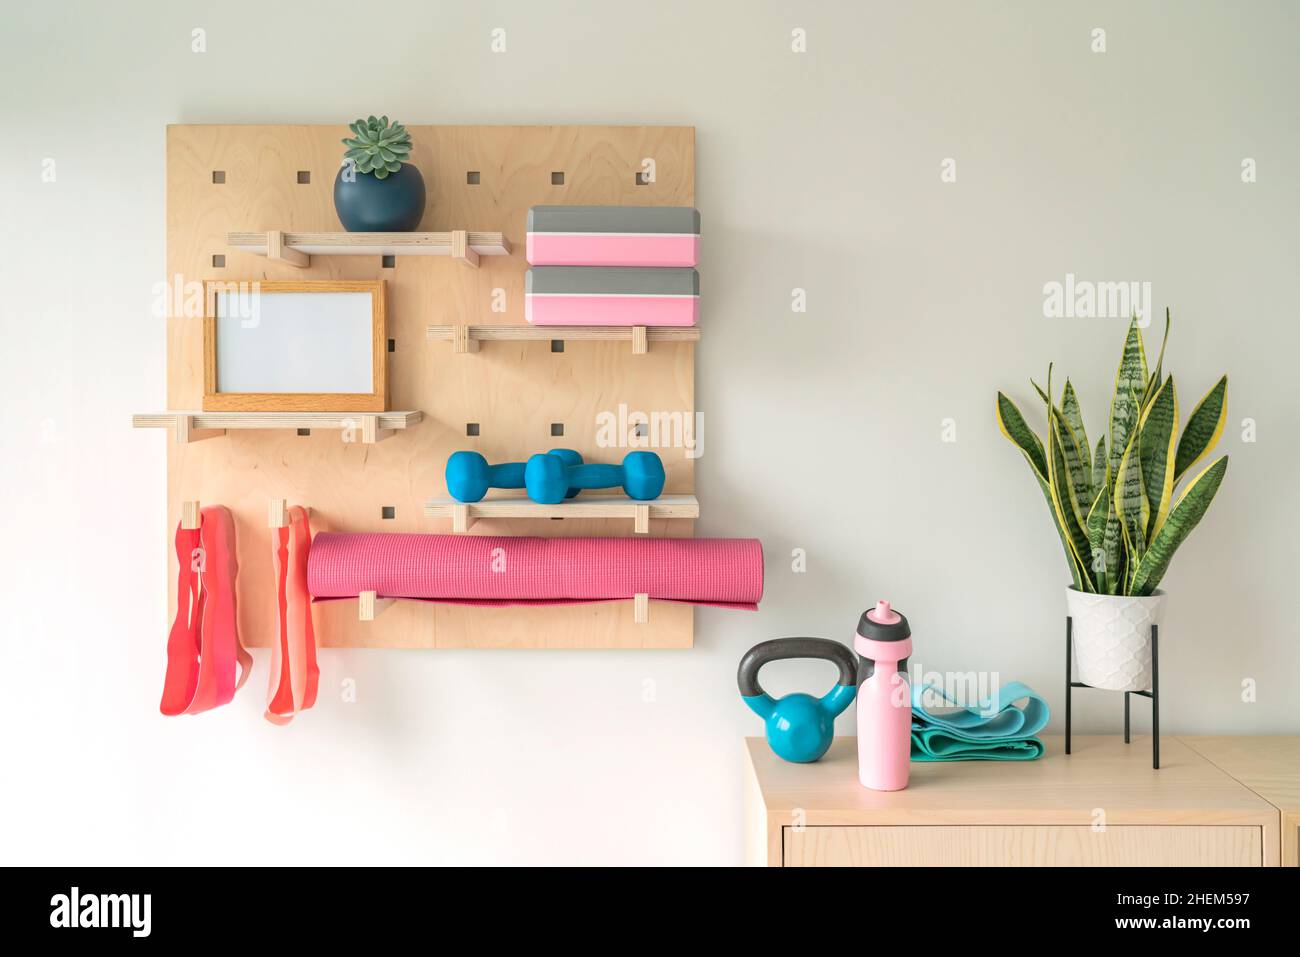 Workout fitness at home gym organized shelves for pilates equipment. Wood pegboard storing resistance bands, weights, yoga blocks, motivational Stock Photo